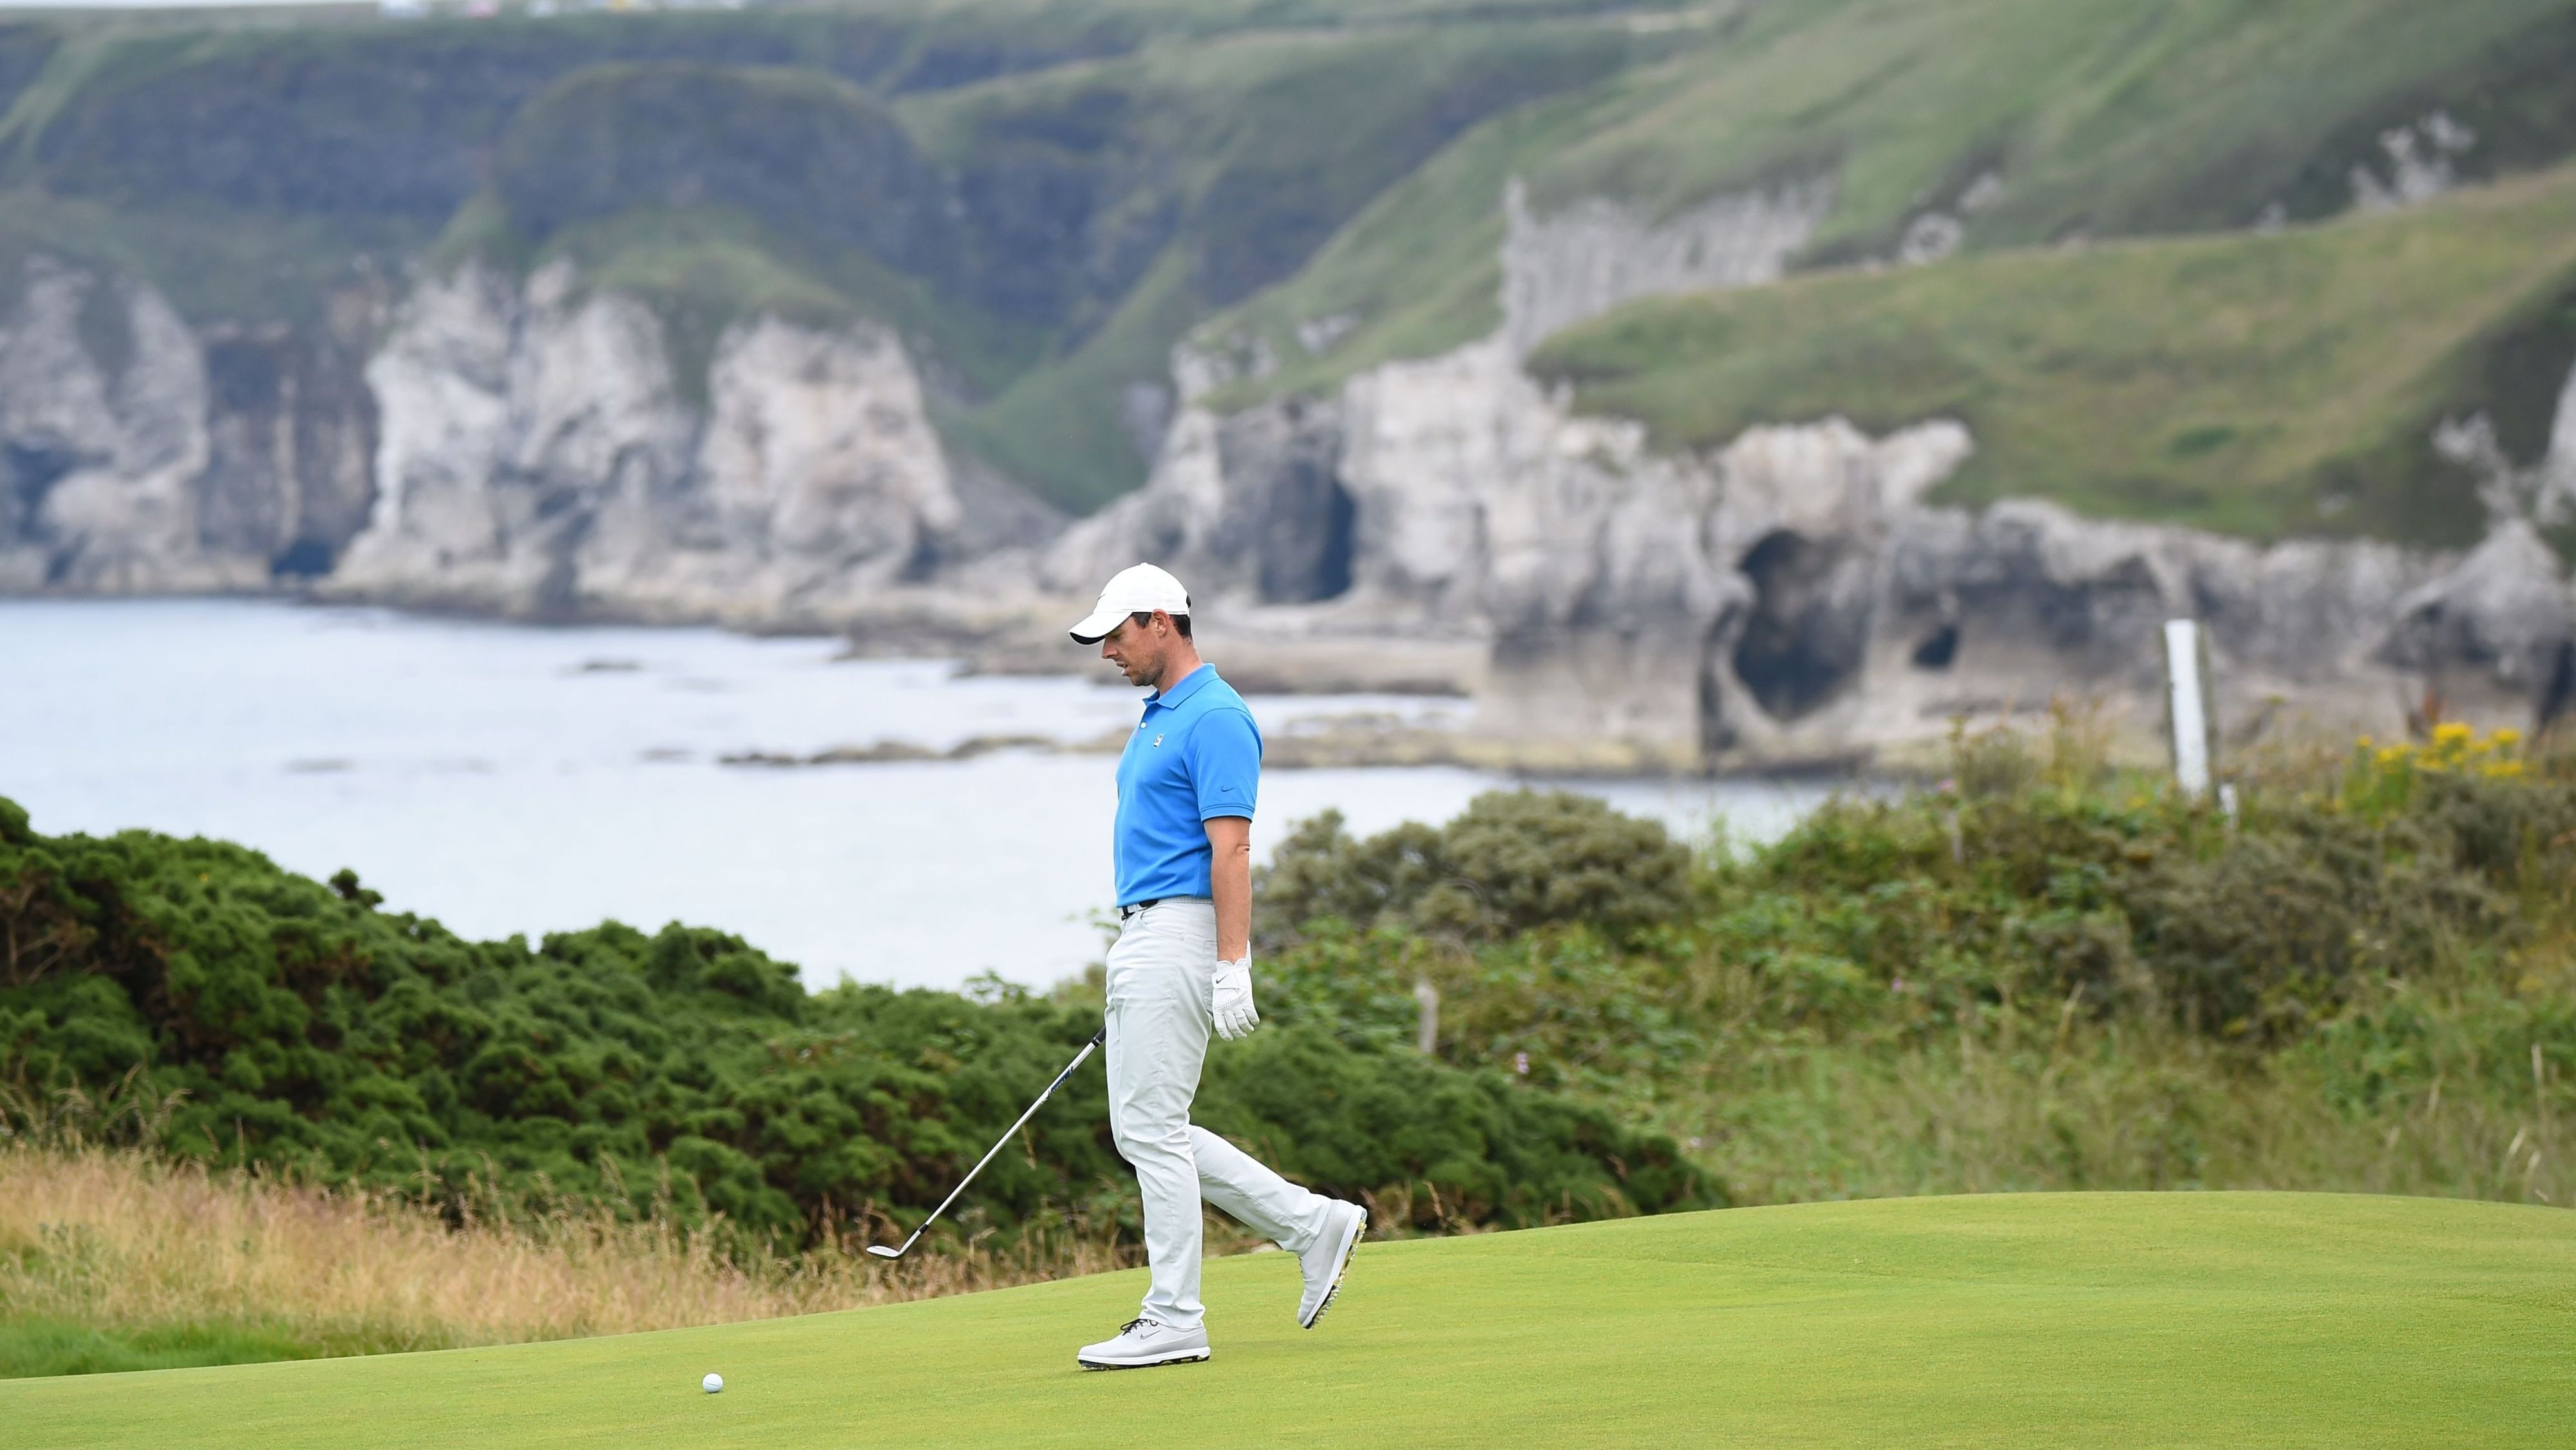 Rory McIlroy practices at Royal Portrush ahead of the 2019 Open